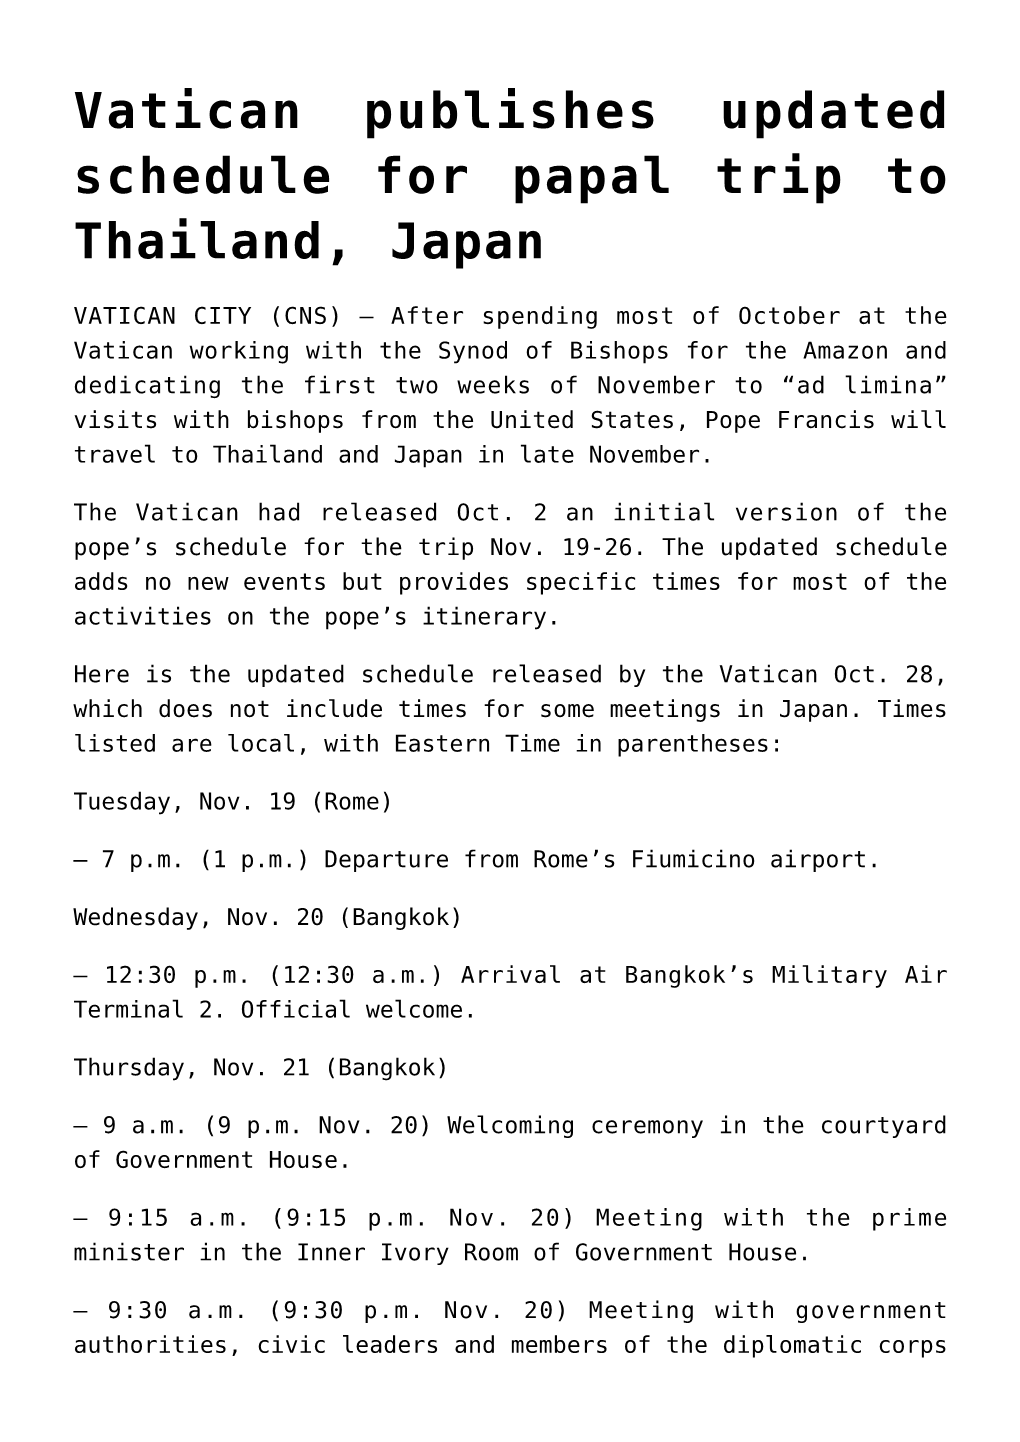 Vatican Publishes Updated Schedule for Papal Trip to Thailand, Japan